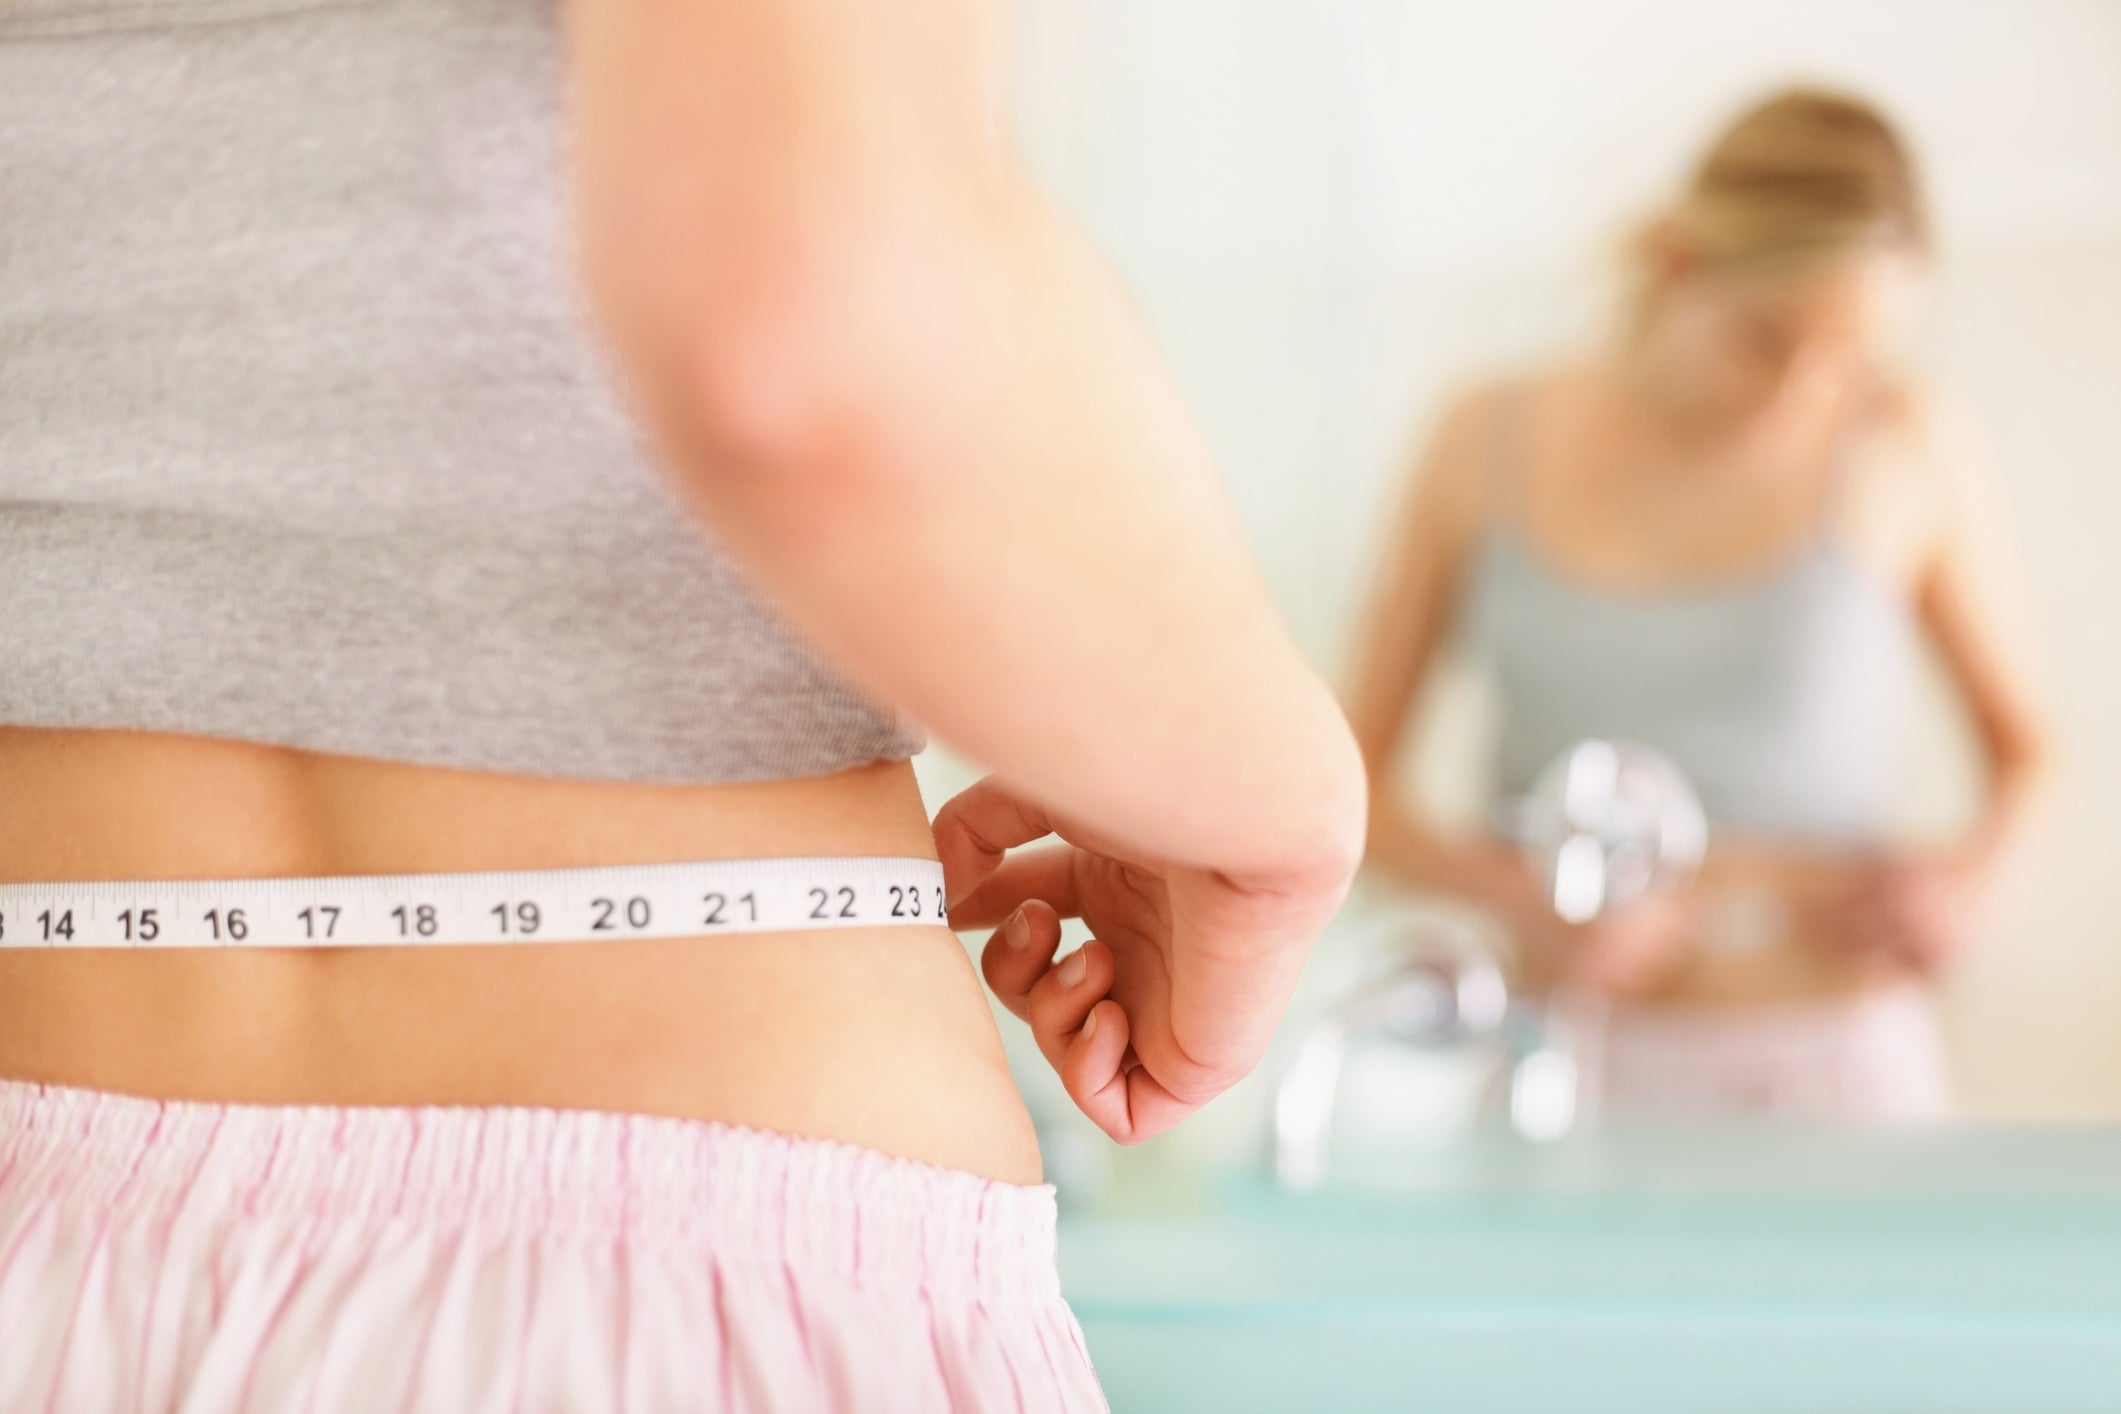 Overweight Woman With Tape Measure Around Waist. Woman Belly Fat